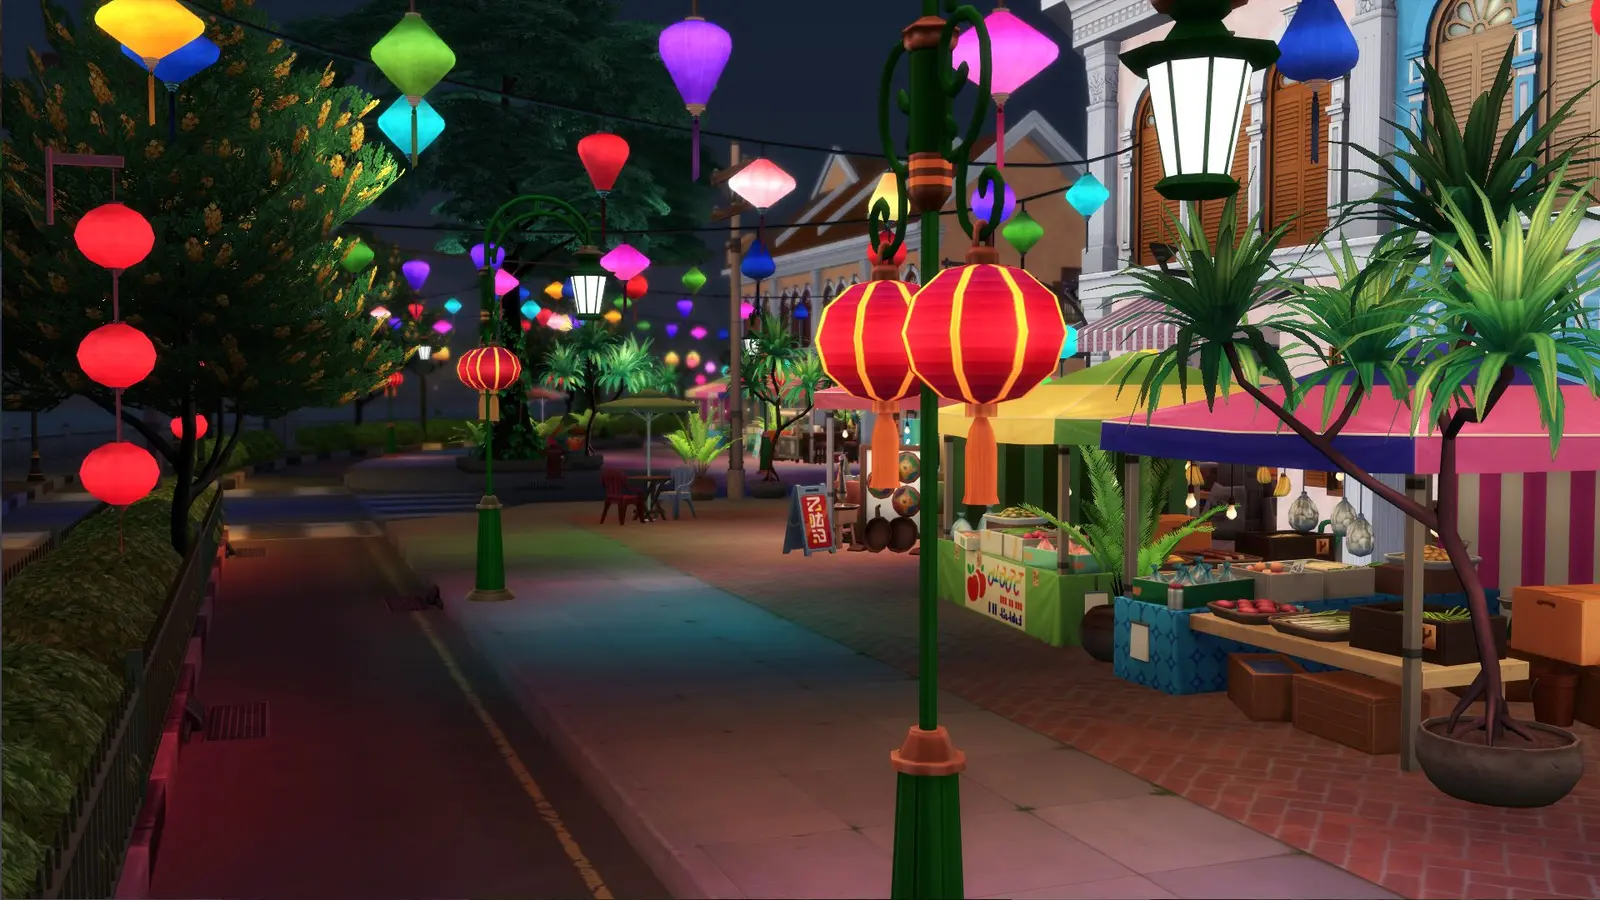 The Tomarang night market in The Sims 4 shining with asian-inspired lanterns in the air